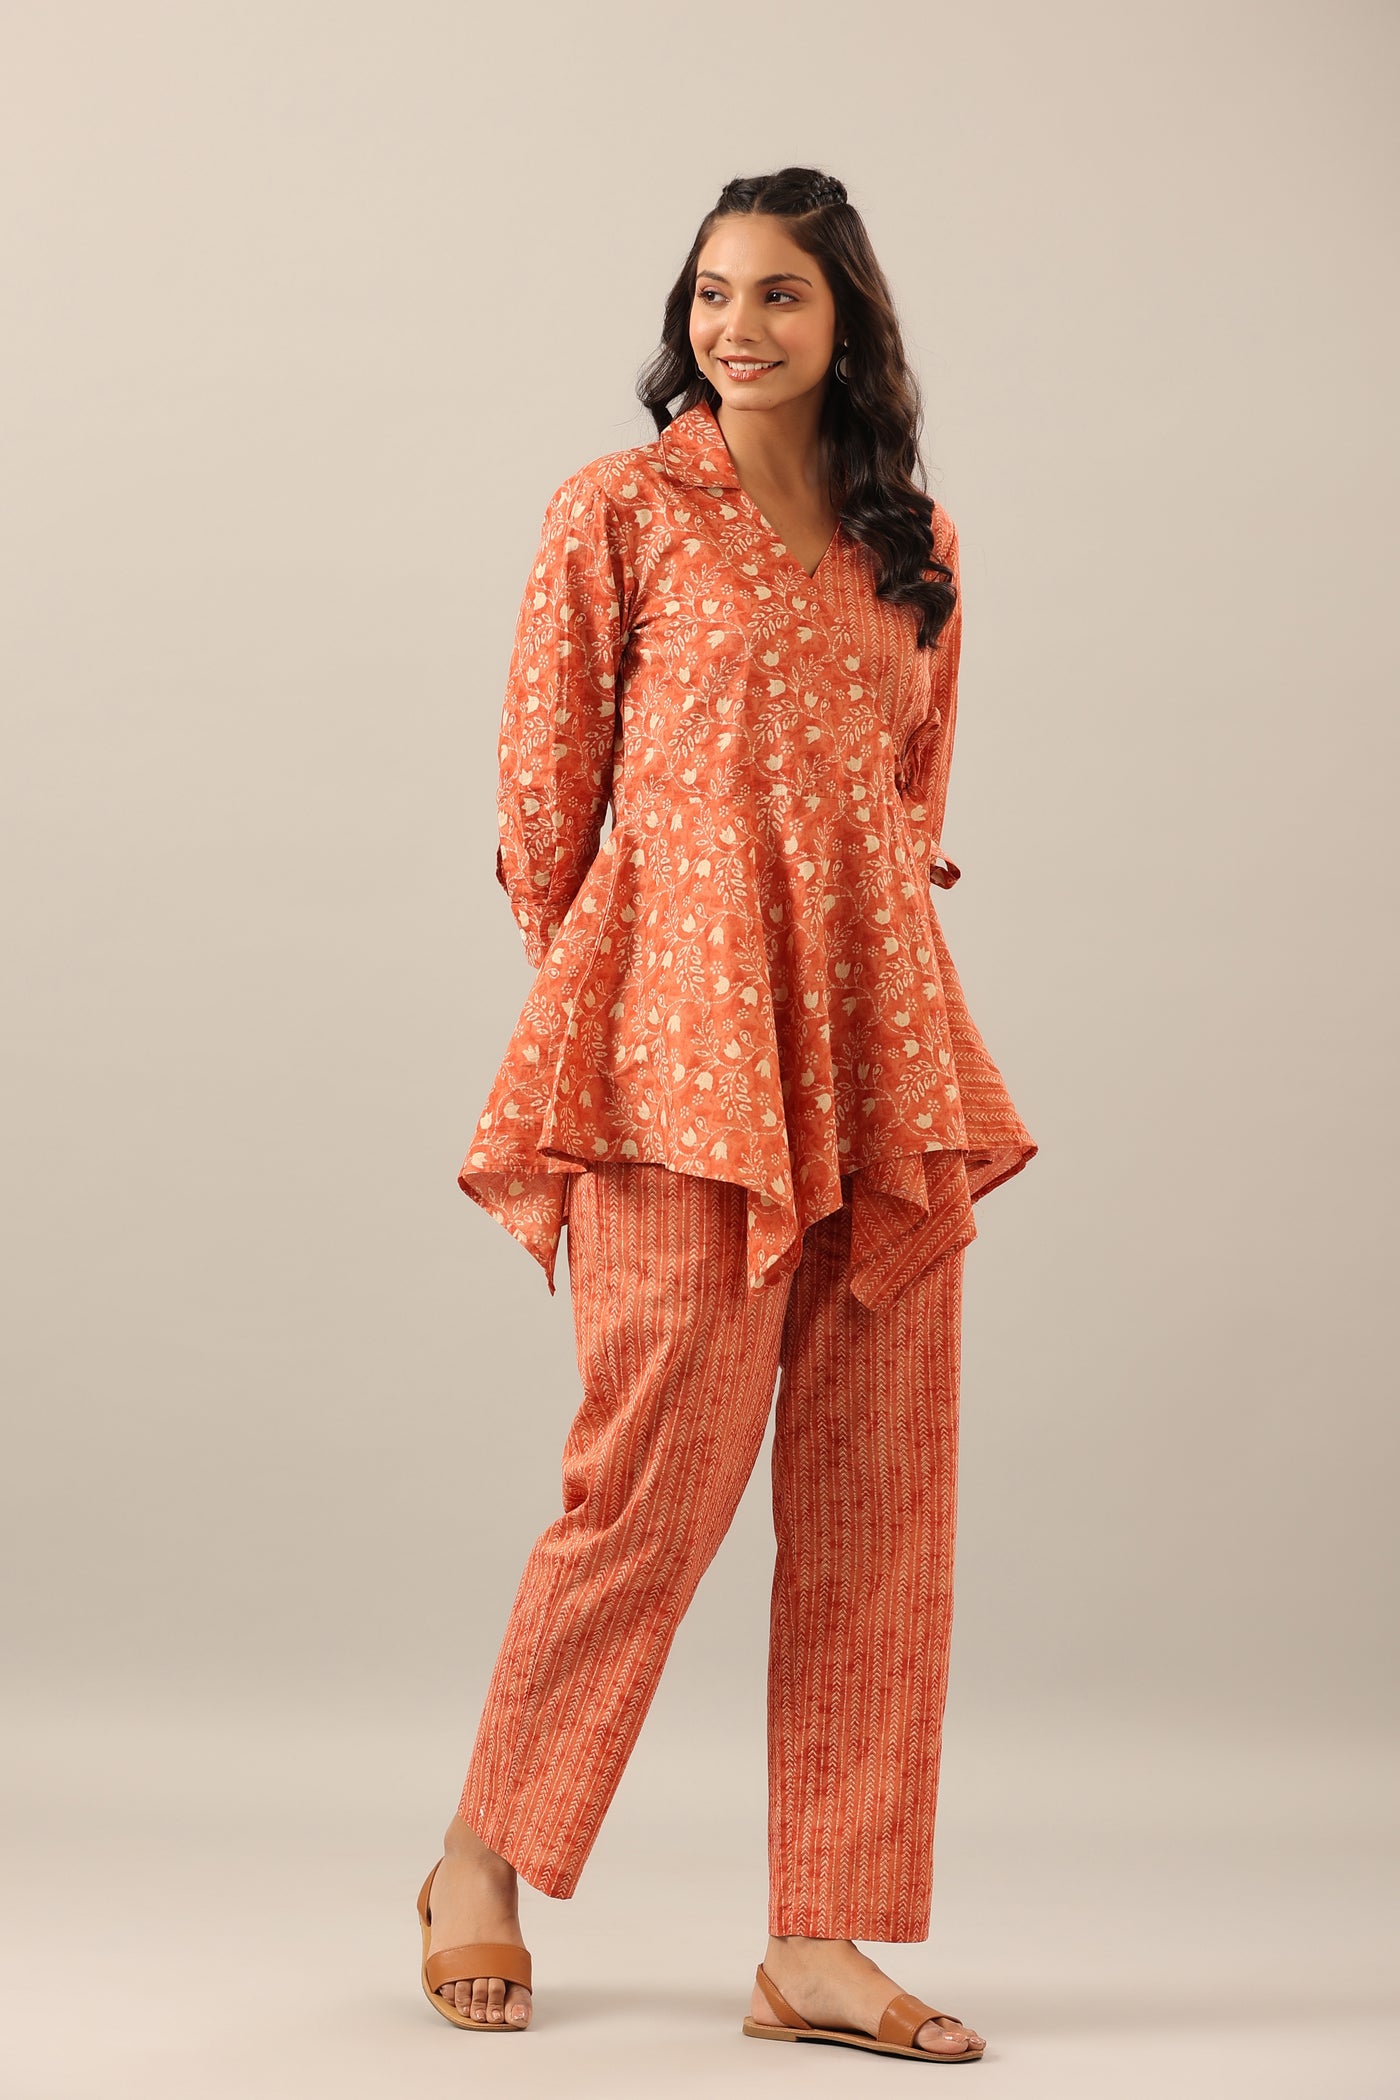 Dainty Florals with Arrows on Orange Cotton Co-ord Set